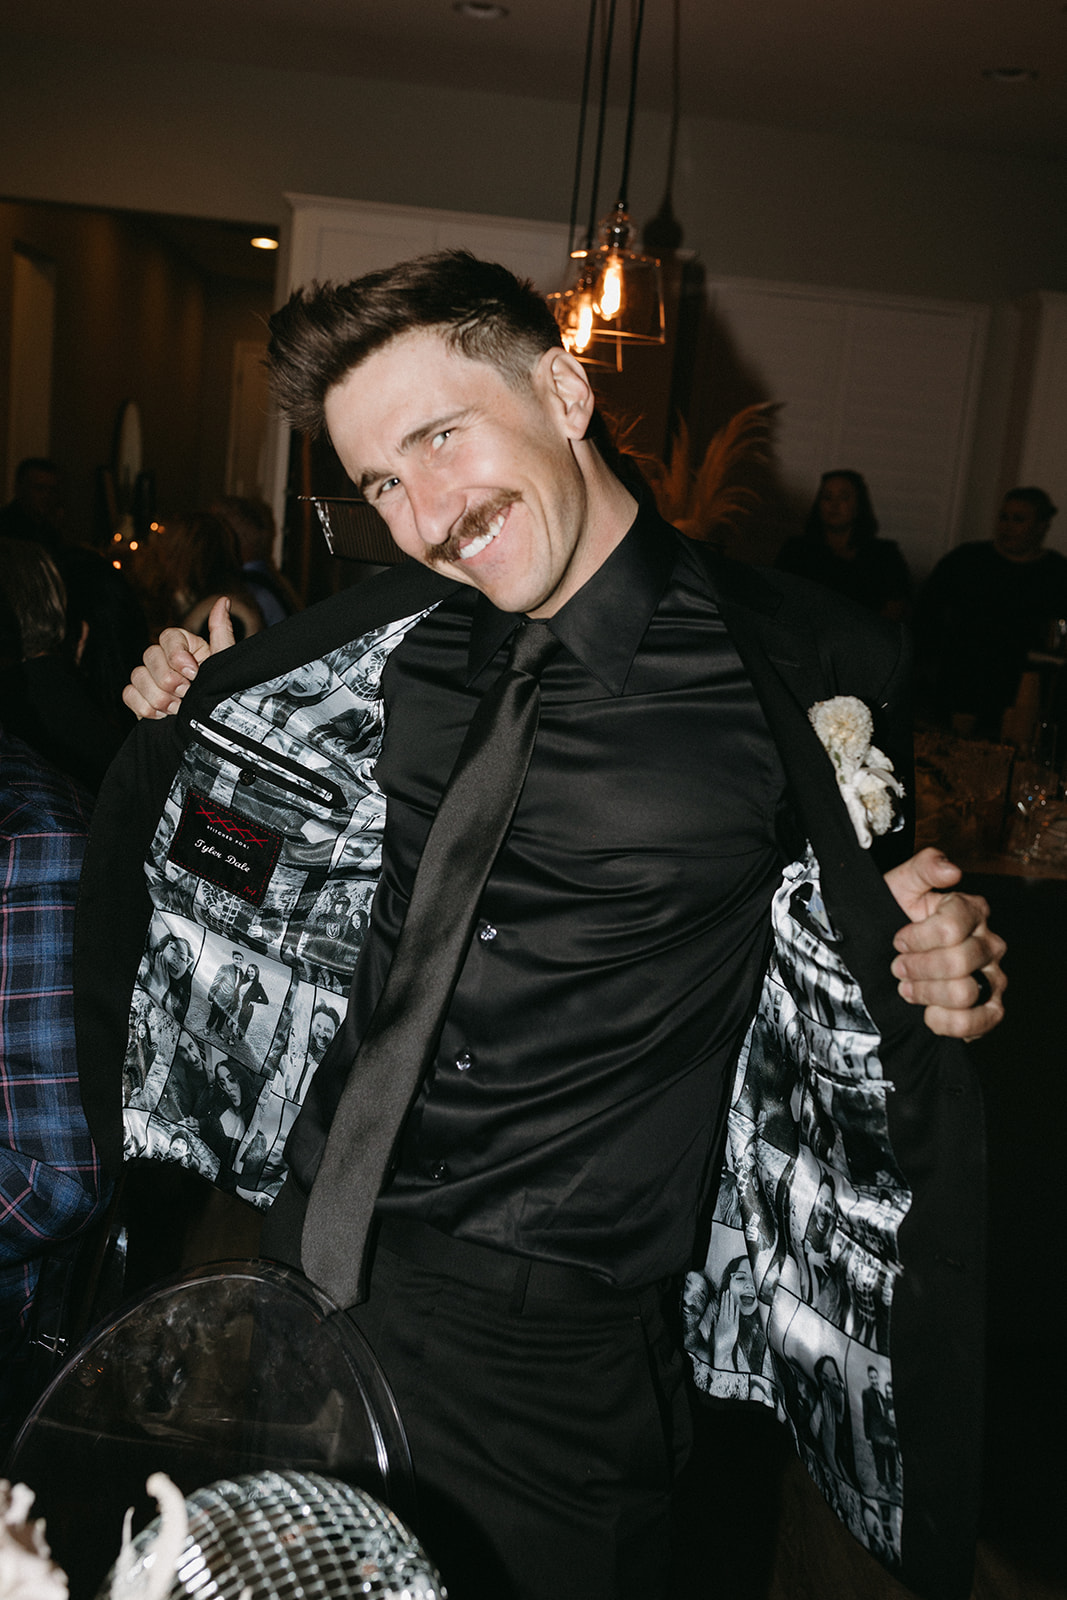 Groom Smiling and Showing his Custom Wedding Jacket with Photos sewn on the inside 